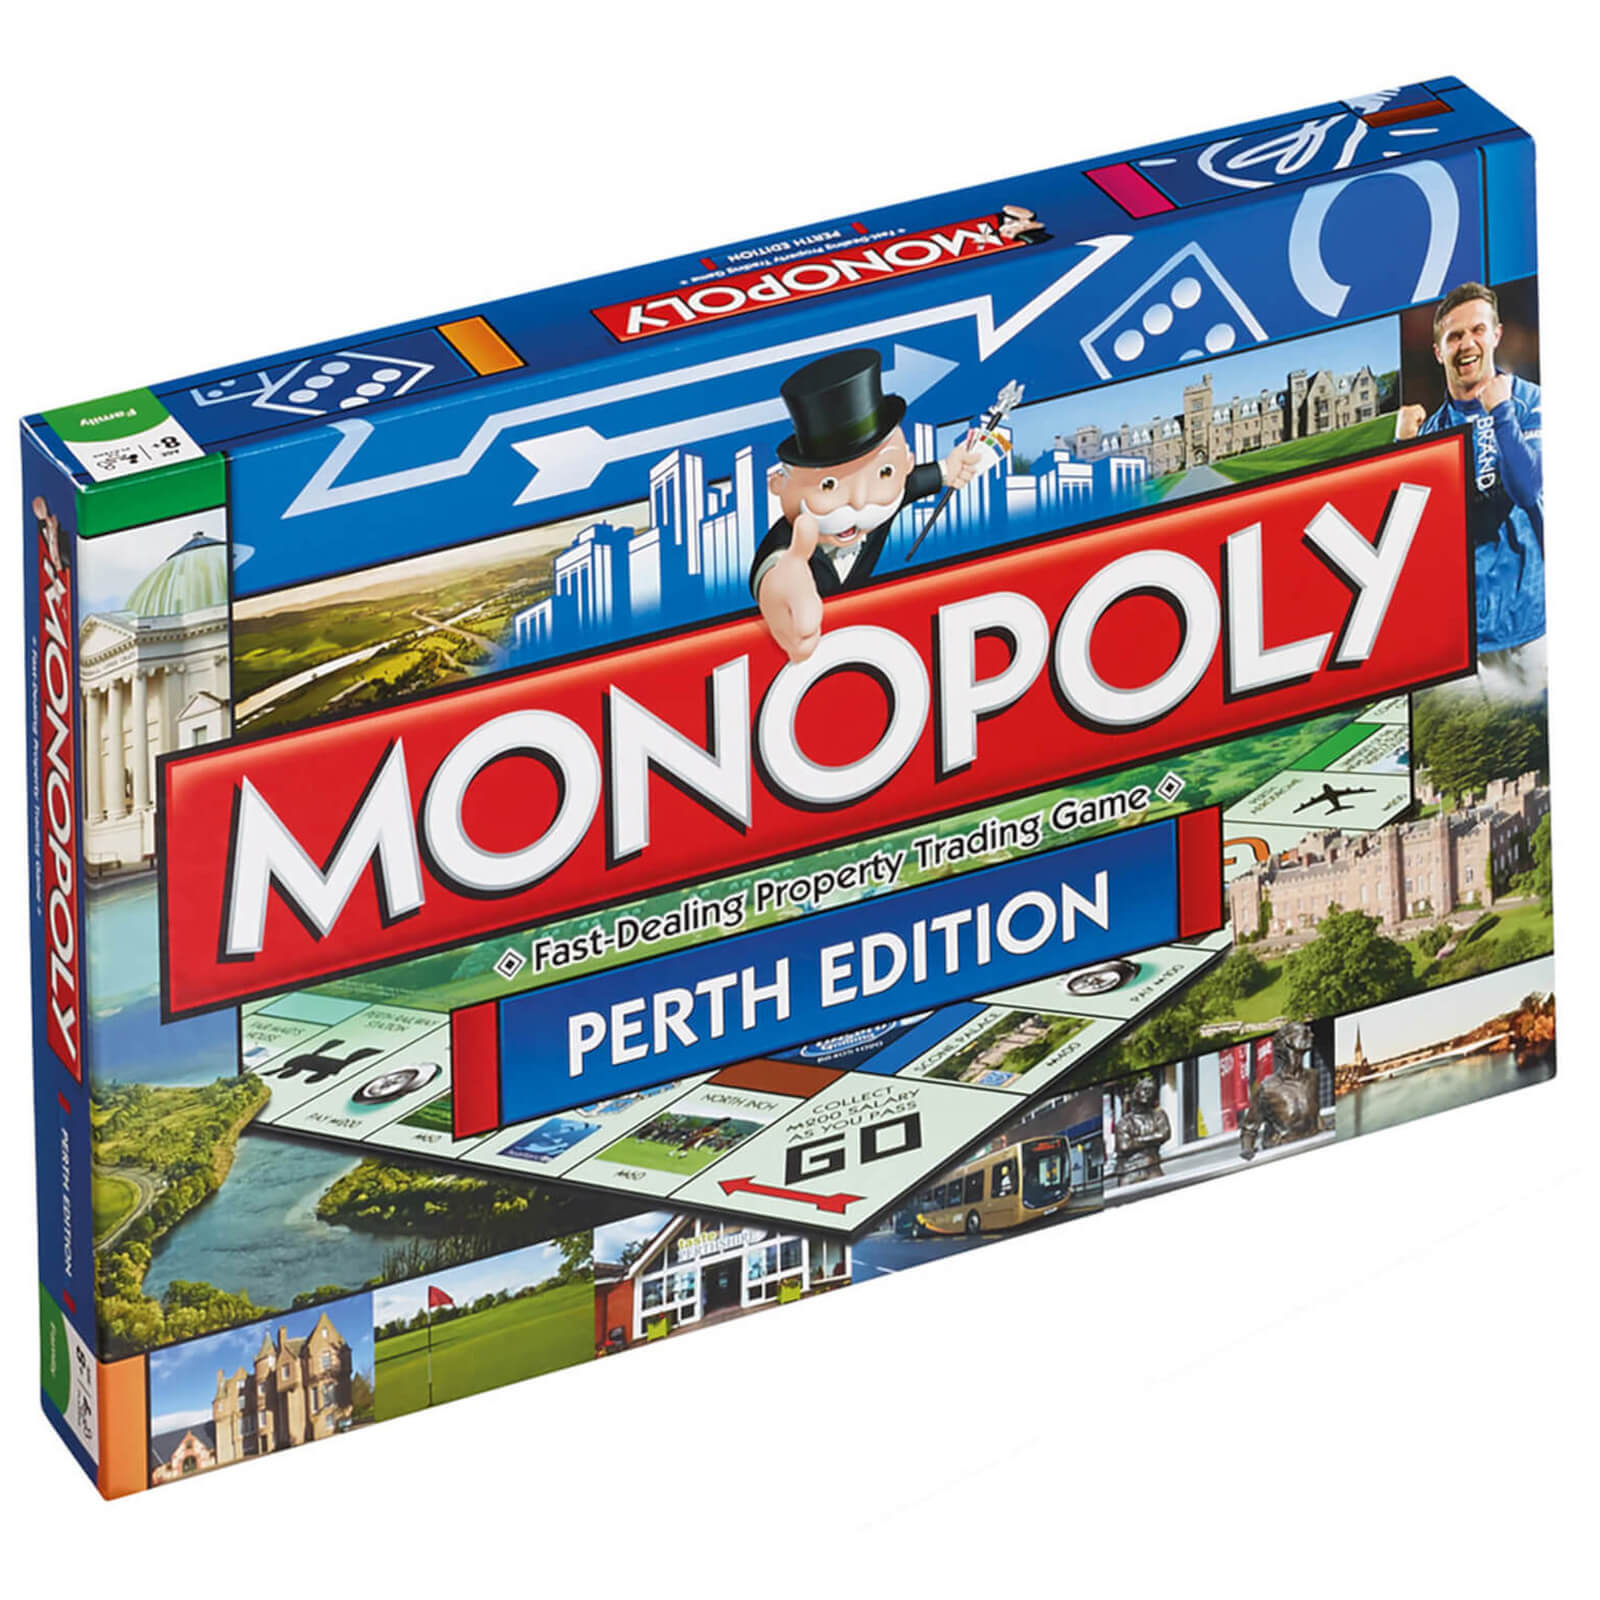 Image of Monopoly Board Game - Perth Edition